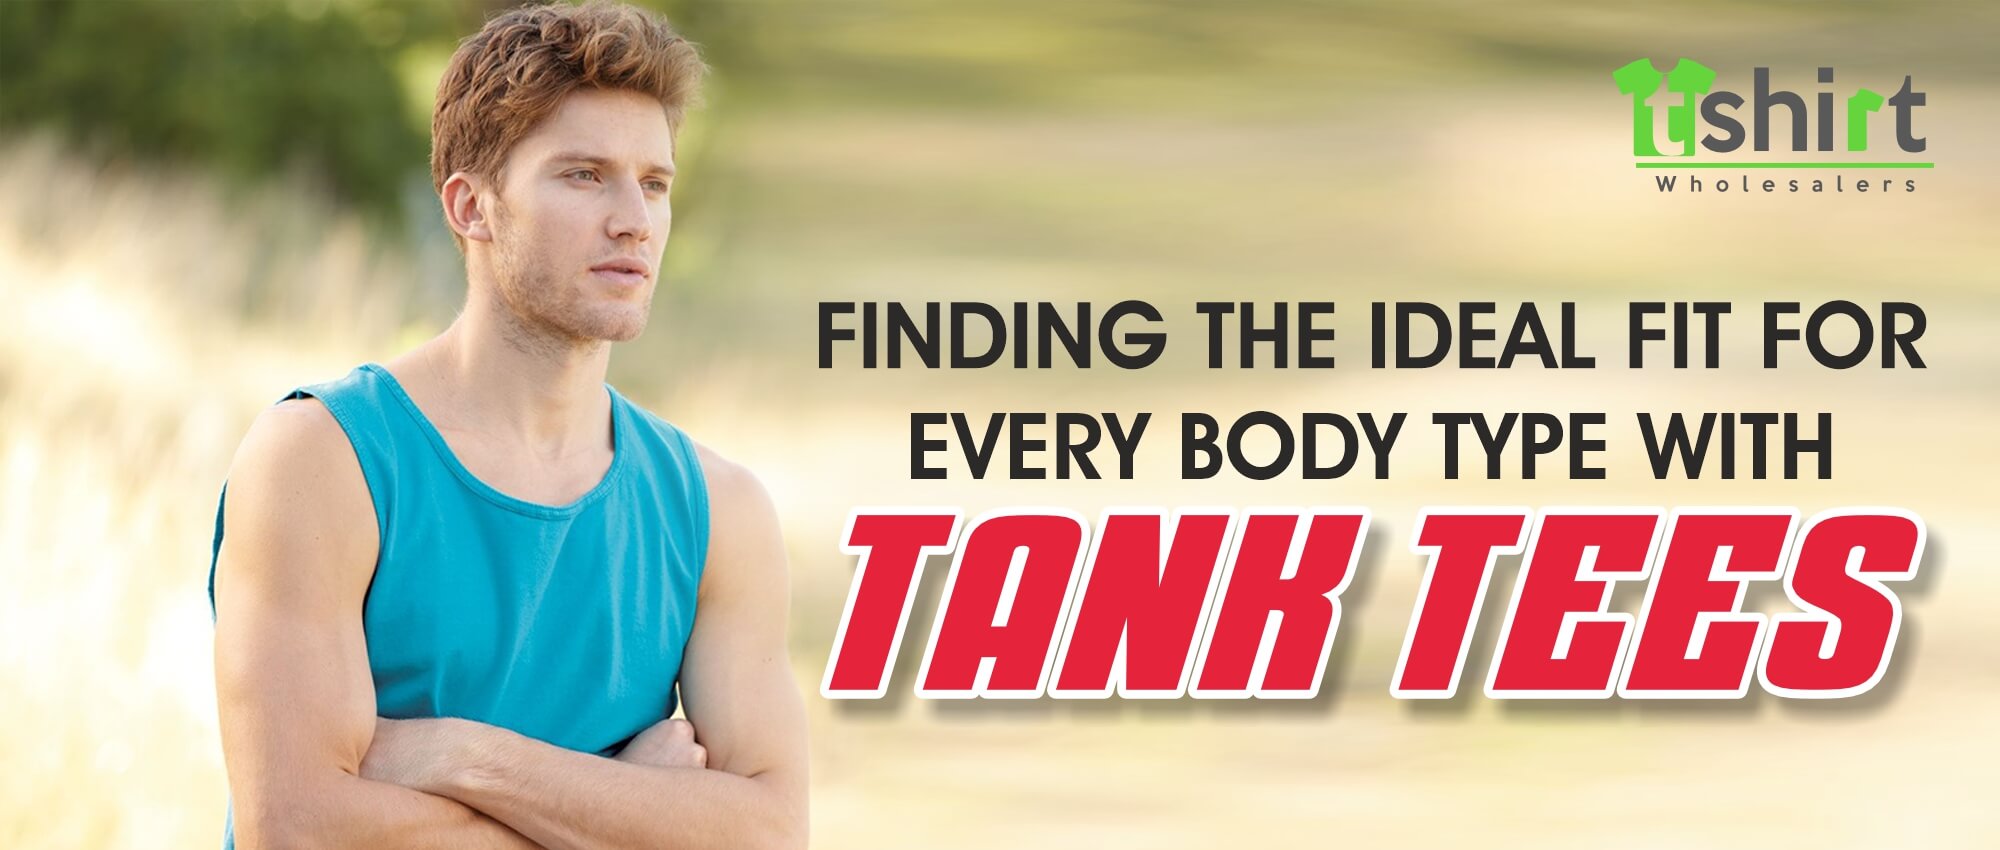 FINDING THE IDEAL FIT FOR EVERY BODY TYPE WITH TANK TEES